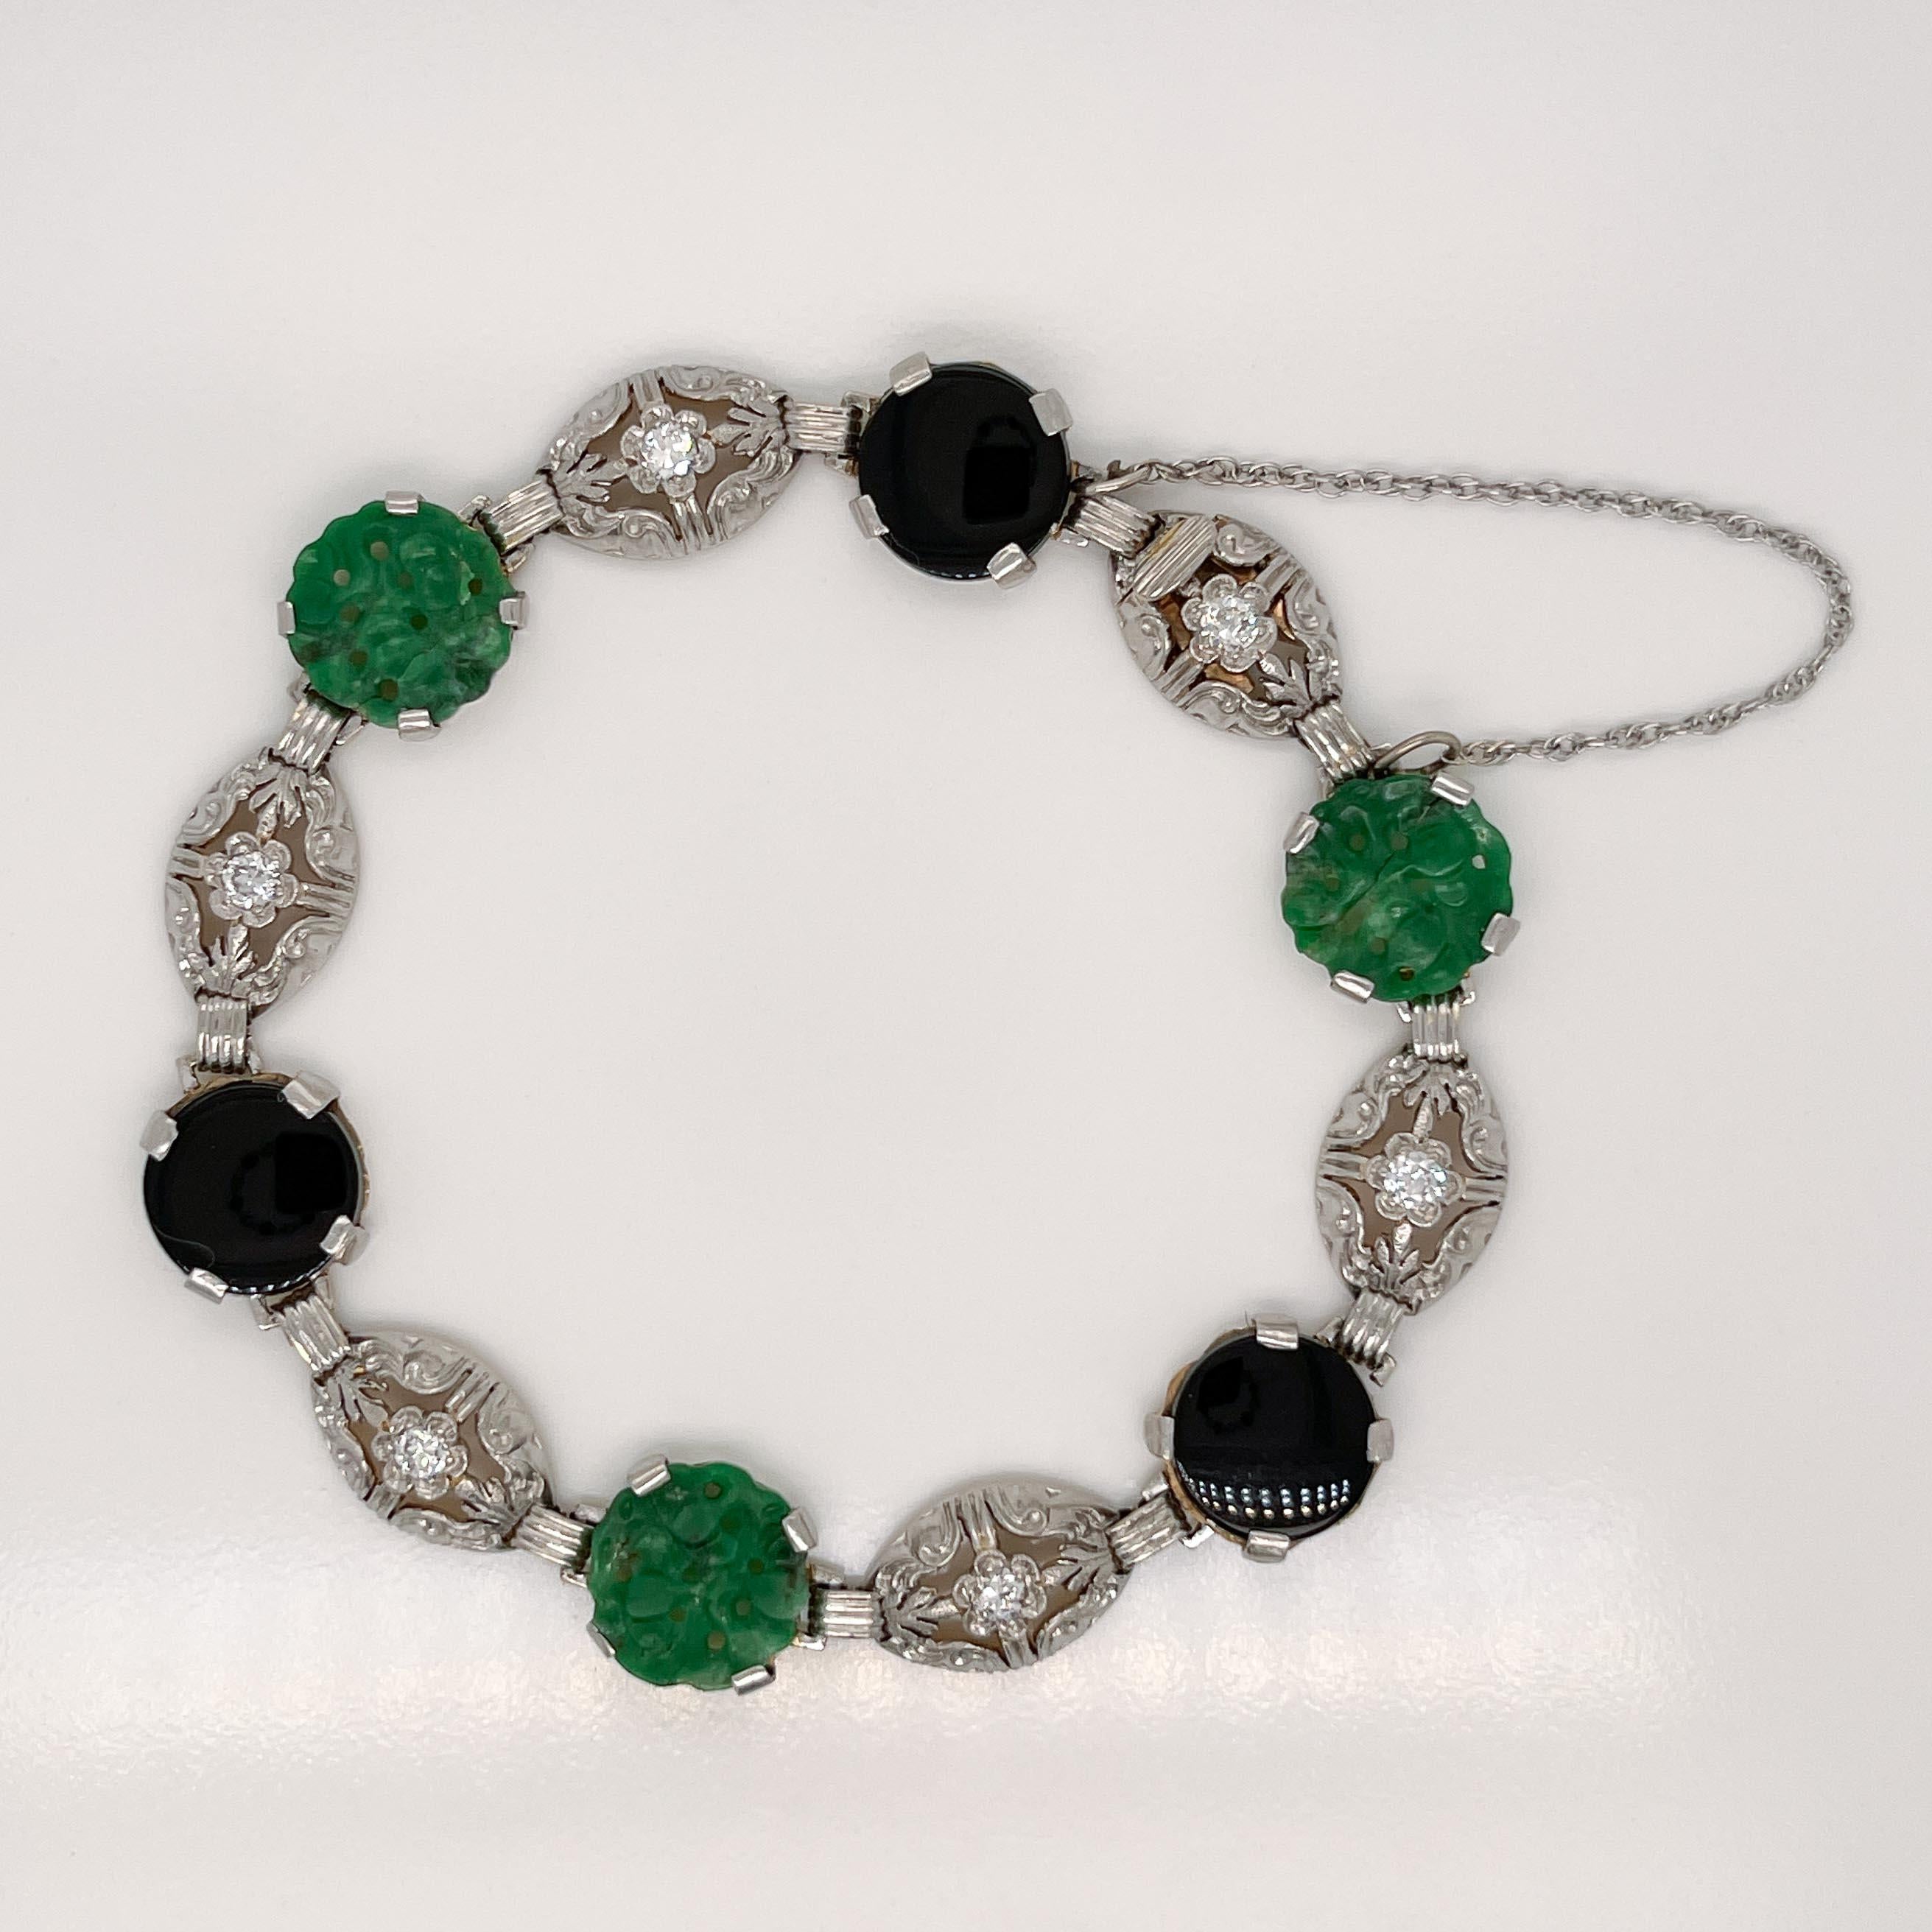 A very fine Art Deco period bracelet. 

In 14k white gold. 

With alternating links set with carved green jade cabochons and smooth, round black onyx cabochons.

Links with round white diamonds in a stylized floral design offset each cabochon links.